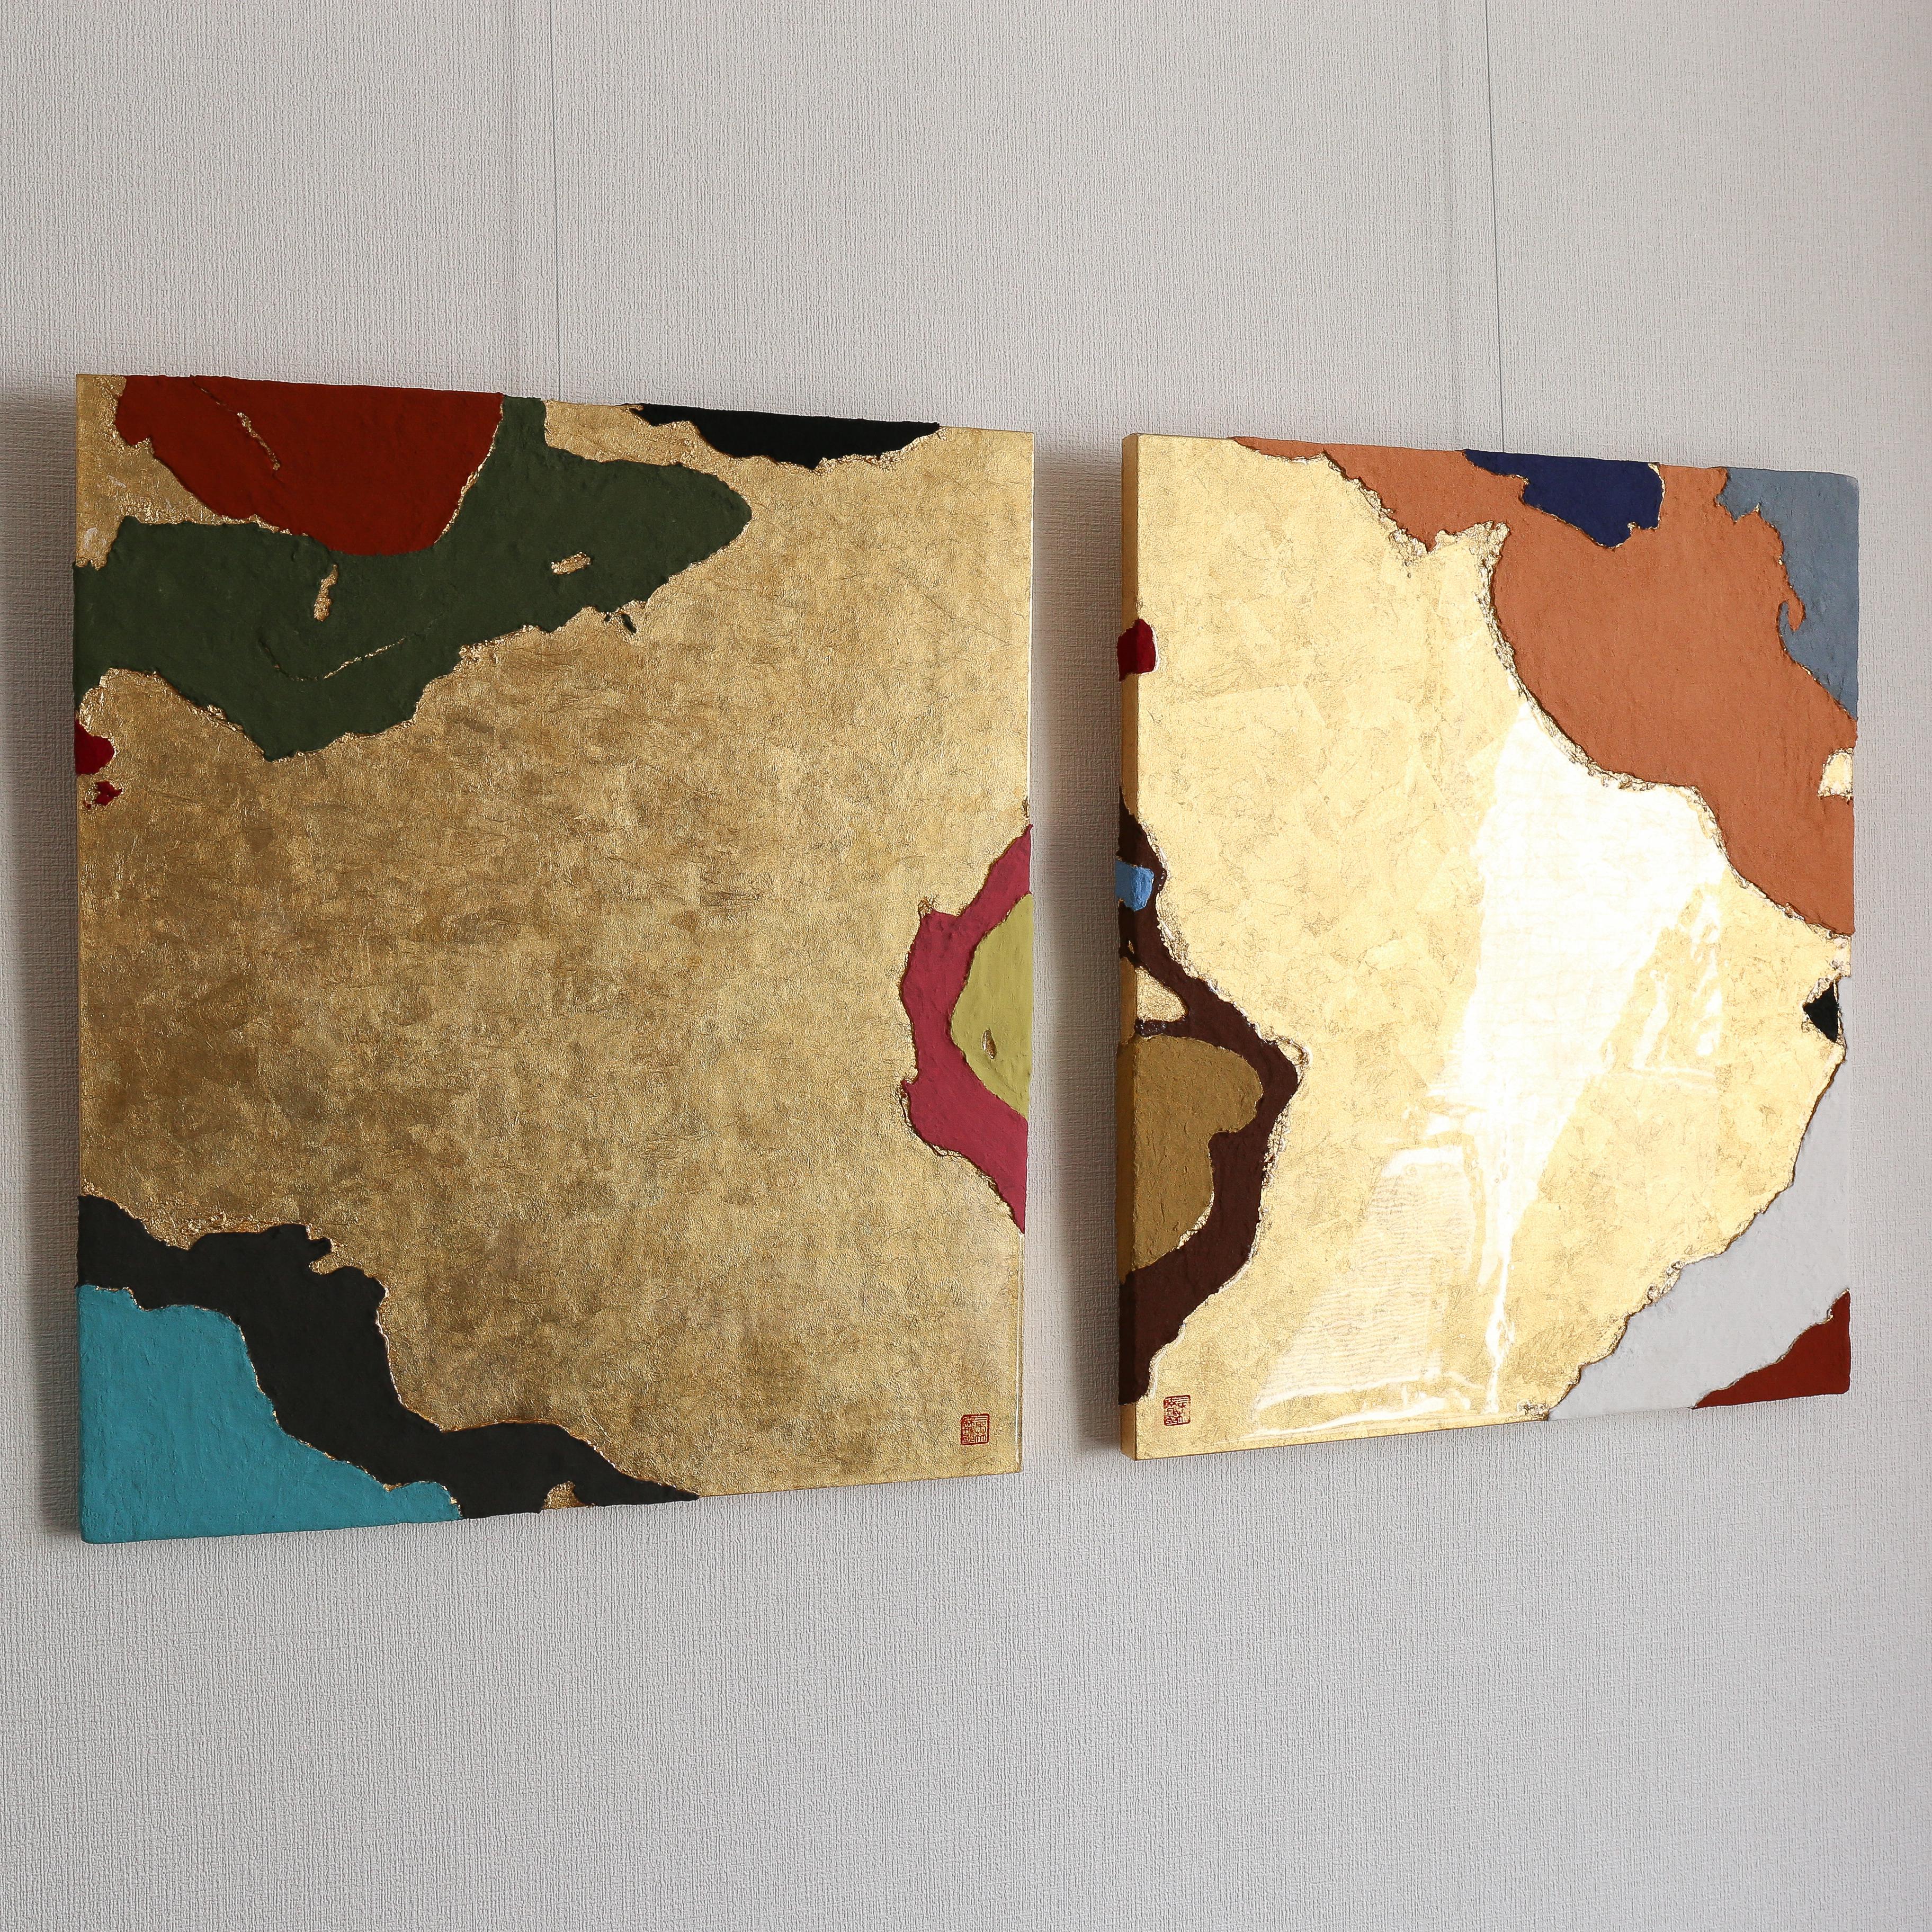 Furaha Mbili - Japanese Gold Leaf and Minerals, 3D Textured Abstract Painting For Sale 7